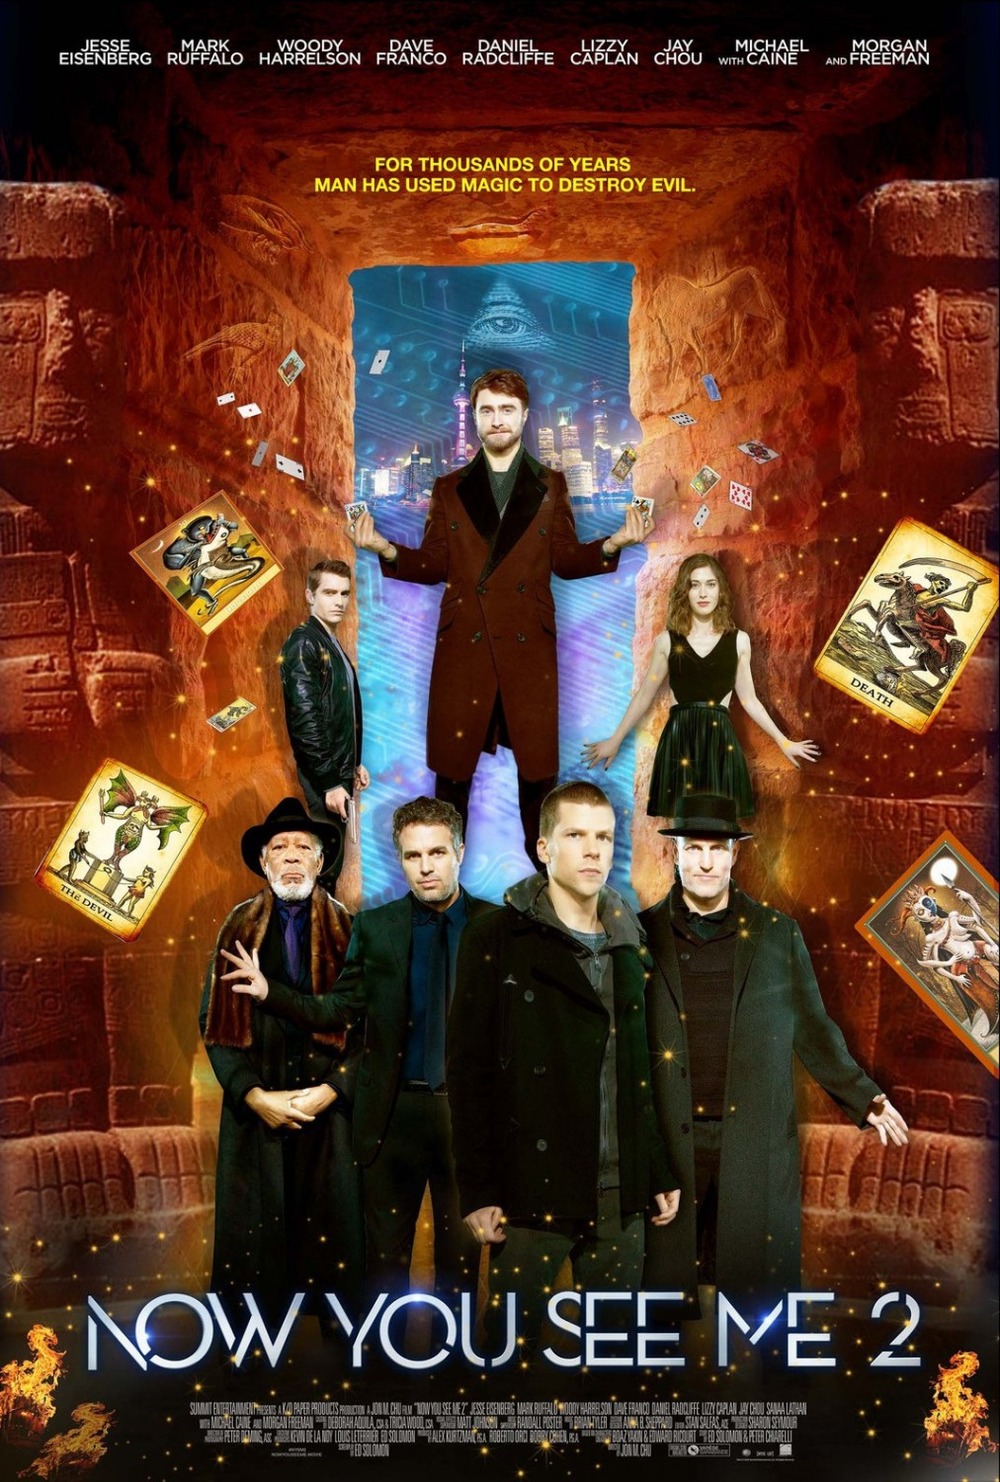 Now You See Me 2 DVD Release Date | Redbox, Netflix, iTunes, Amazon